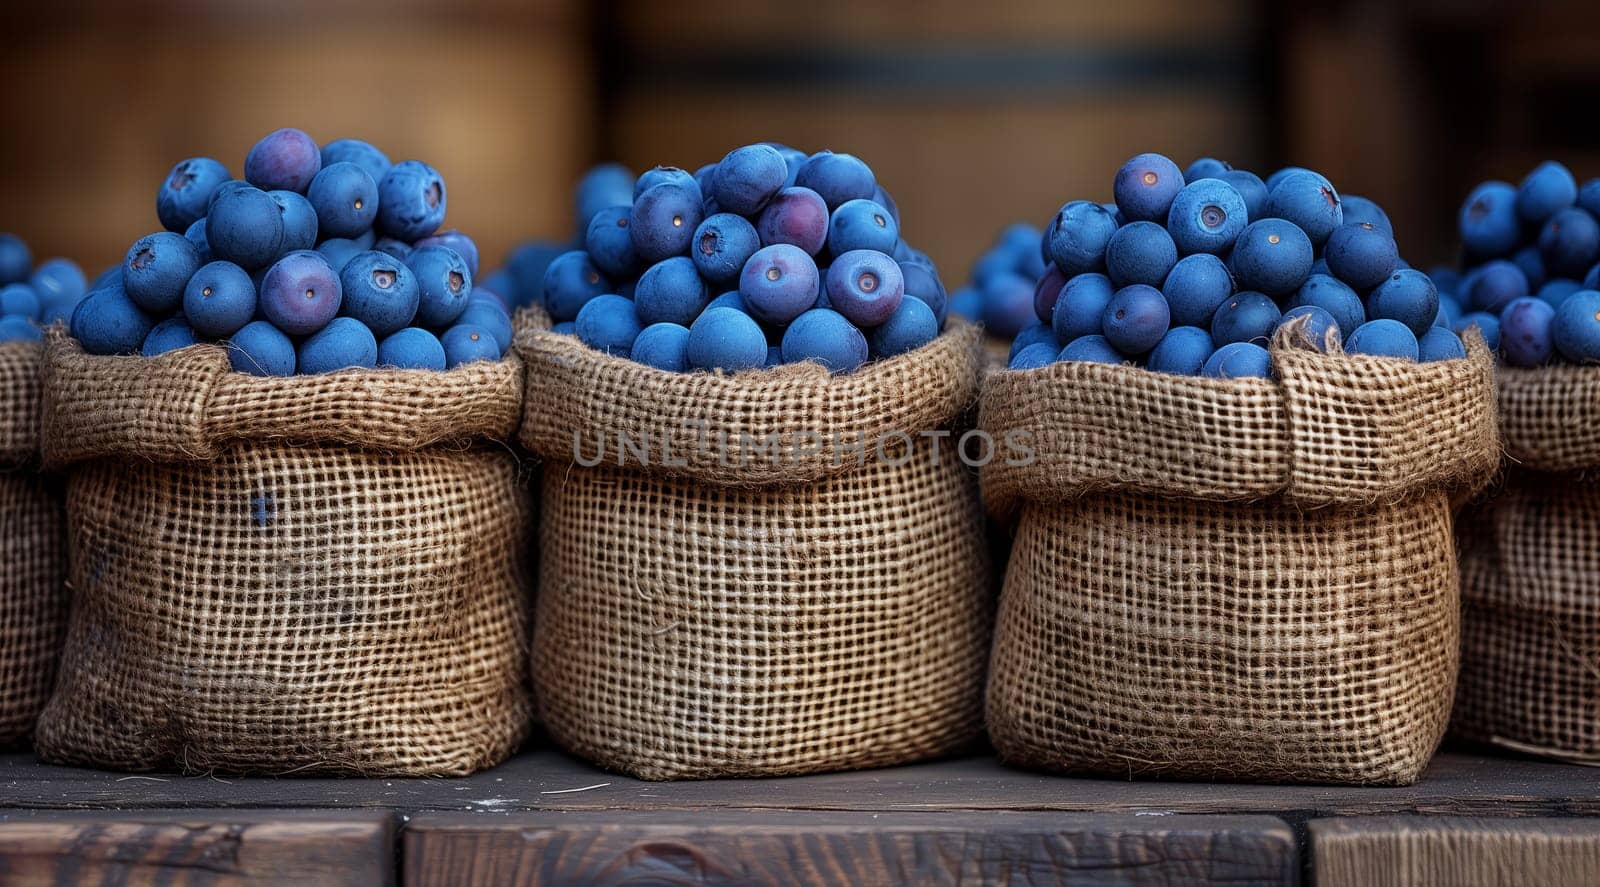 A row of storage baskets filled with electric blueberries at the local market by richwolf